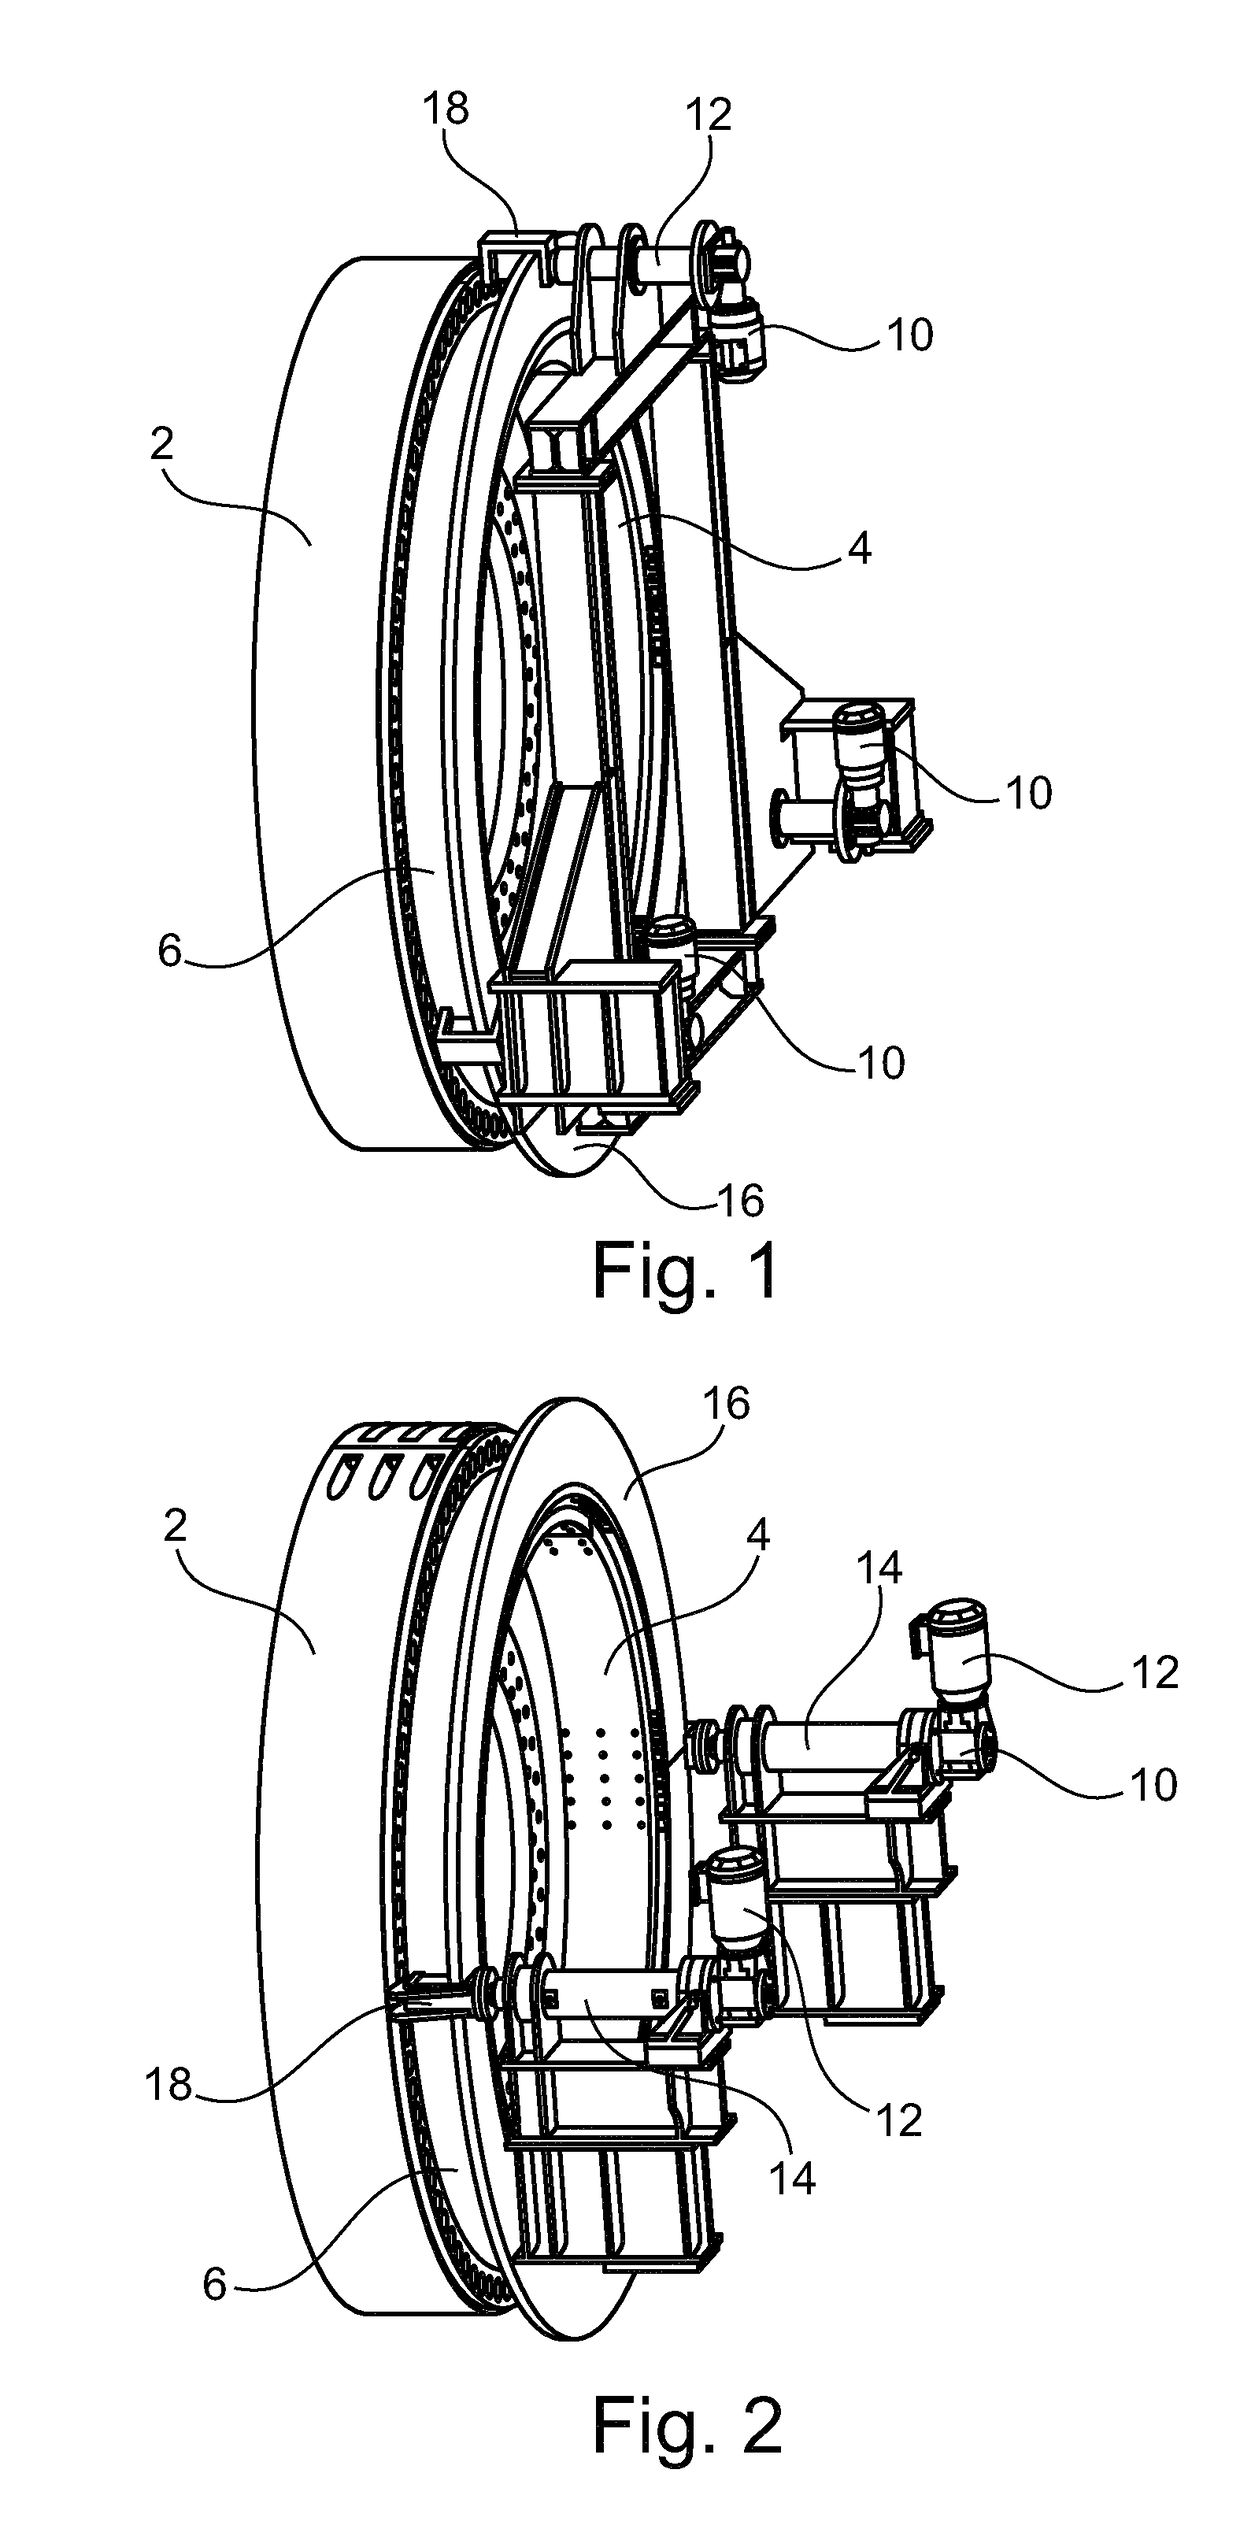 Coupling device